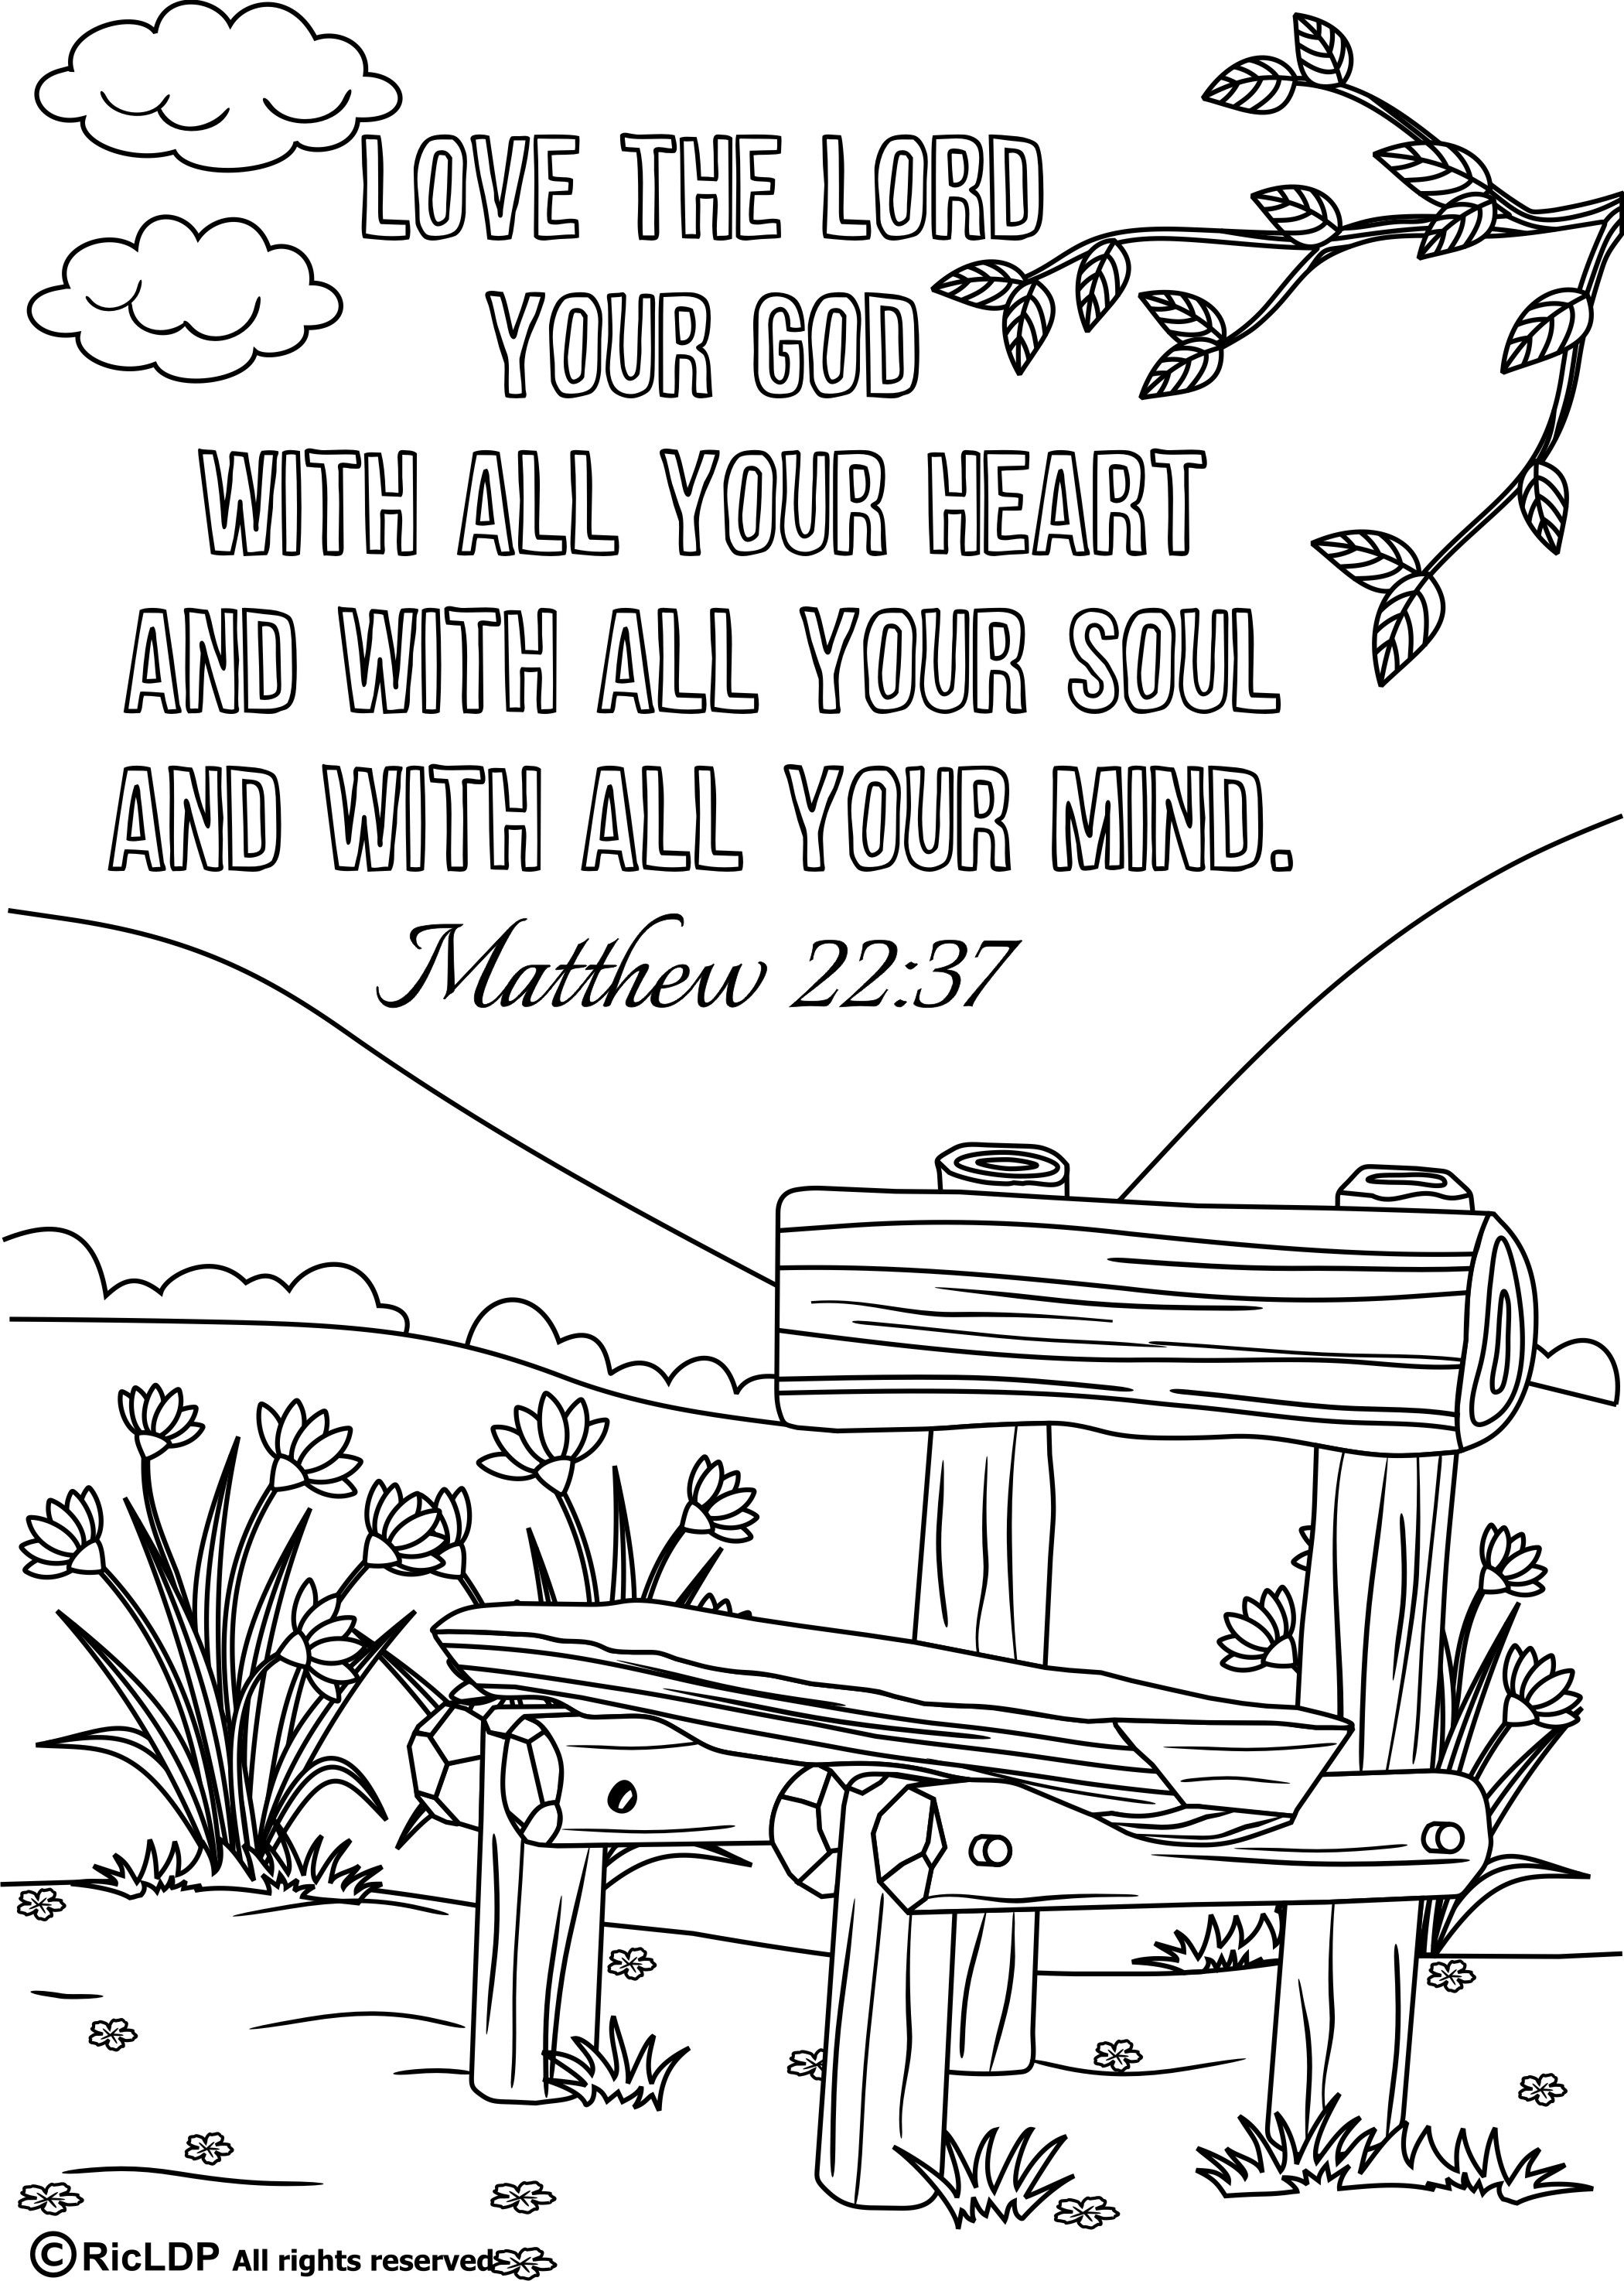 15 Bible Verses Coloring Pages - Free Printable Sunday School Coloring Sheets